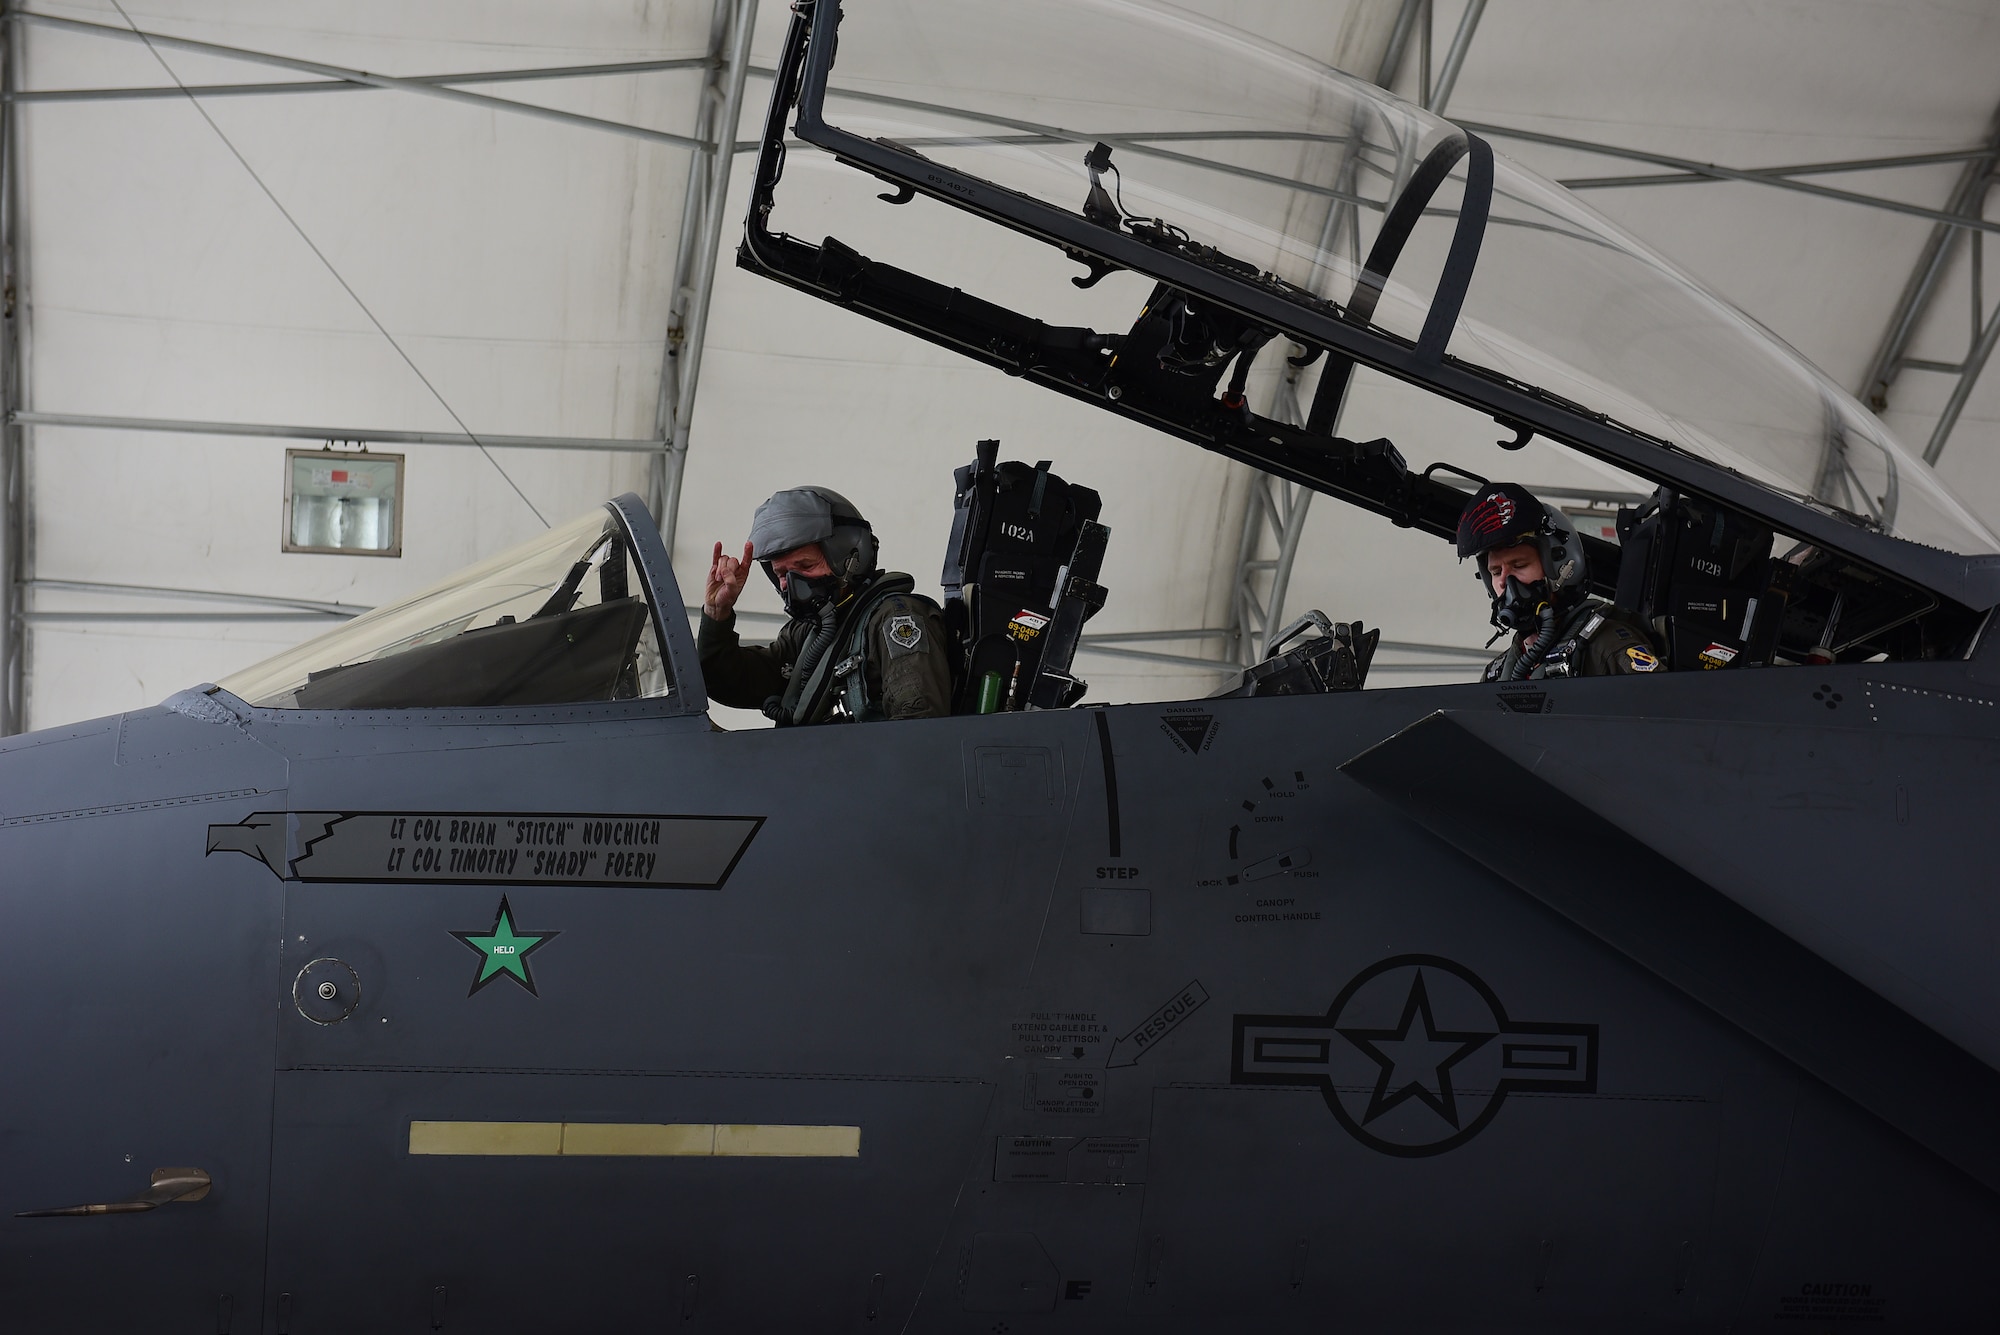 From left, Gen. Mike Holmes, commander of Air Combat Command, and Capt. John Tilton, 333rd Fighter Squadron pilot, after flying in an F-15E Strike Eagle, Feb. 27, 2019, at Seymour Johnson Air Force Base, North Carolina. Holmes previously flew the F-15E while he was the commander of the 4th FW from August 2004 until September 2006. (U.S. Air Force photo by Senior Airman Kenneth Boyton)